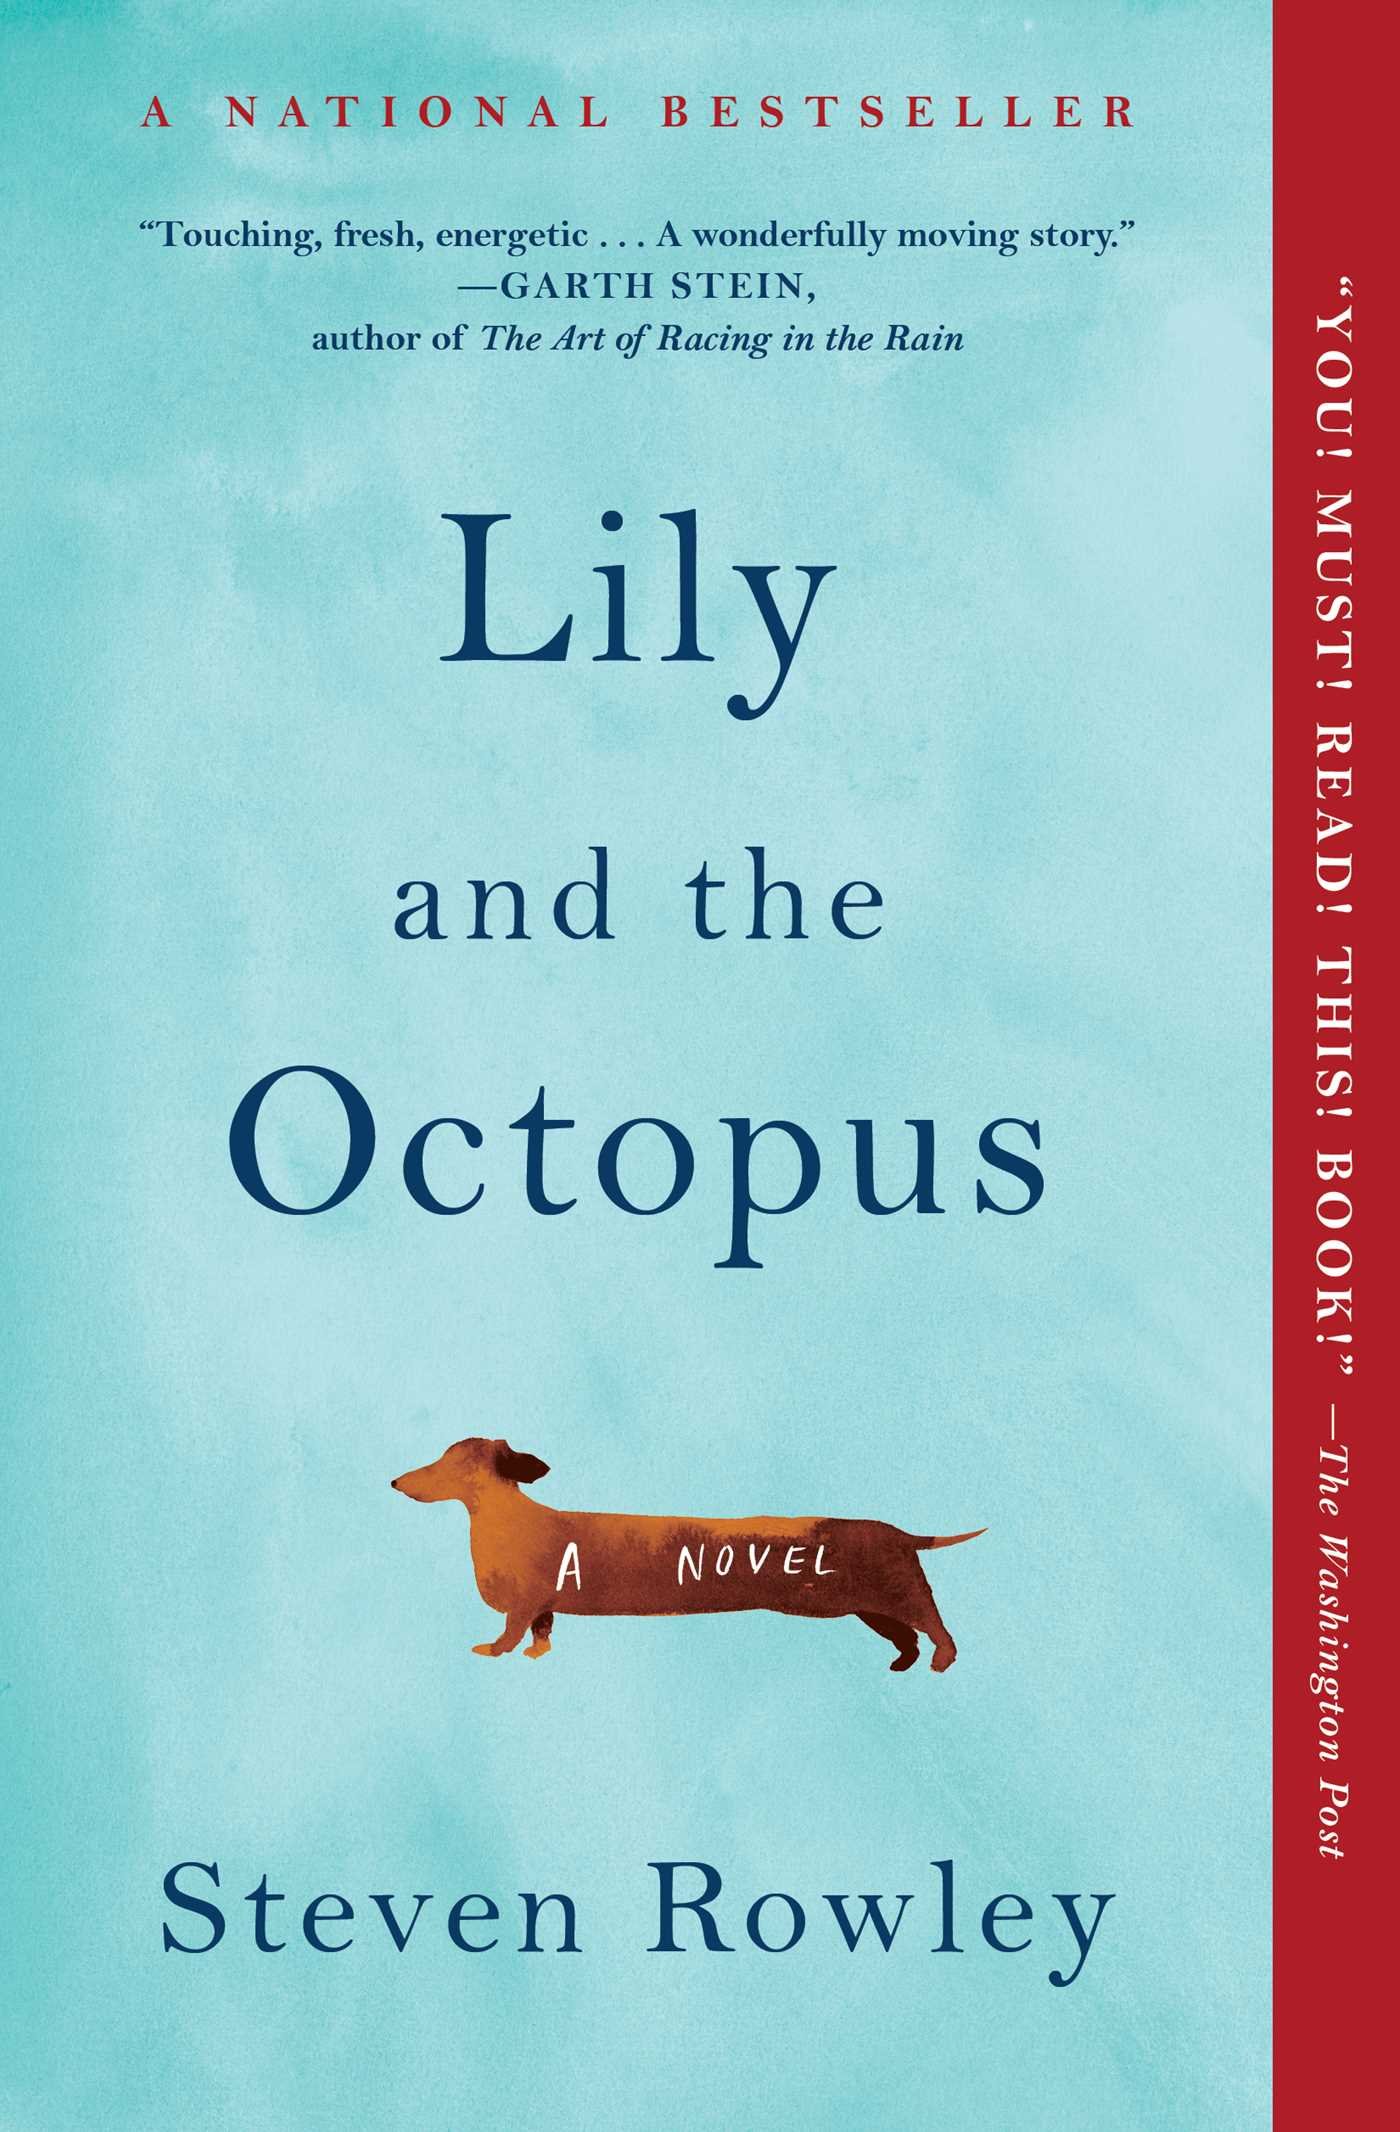 book on octopus8